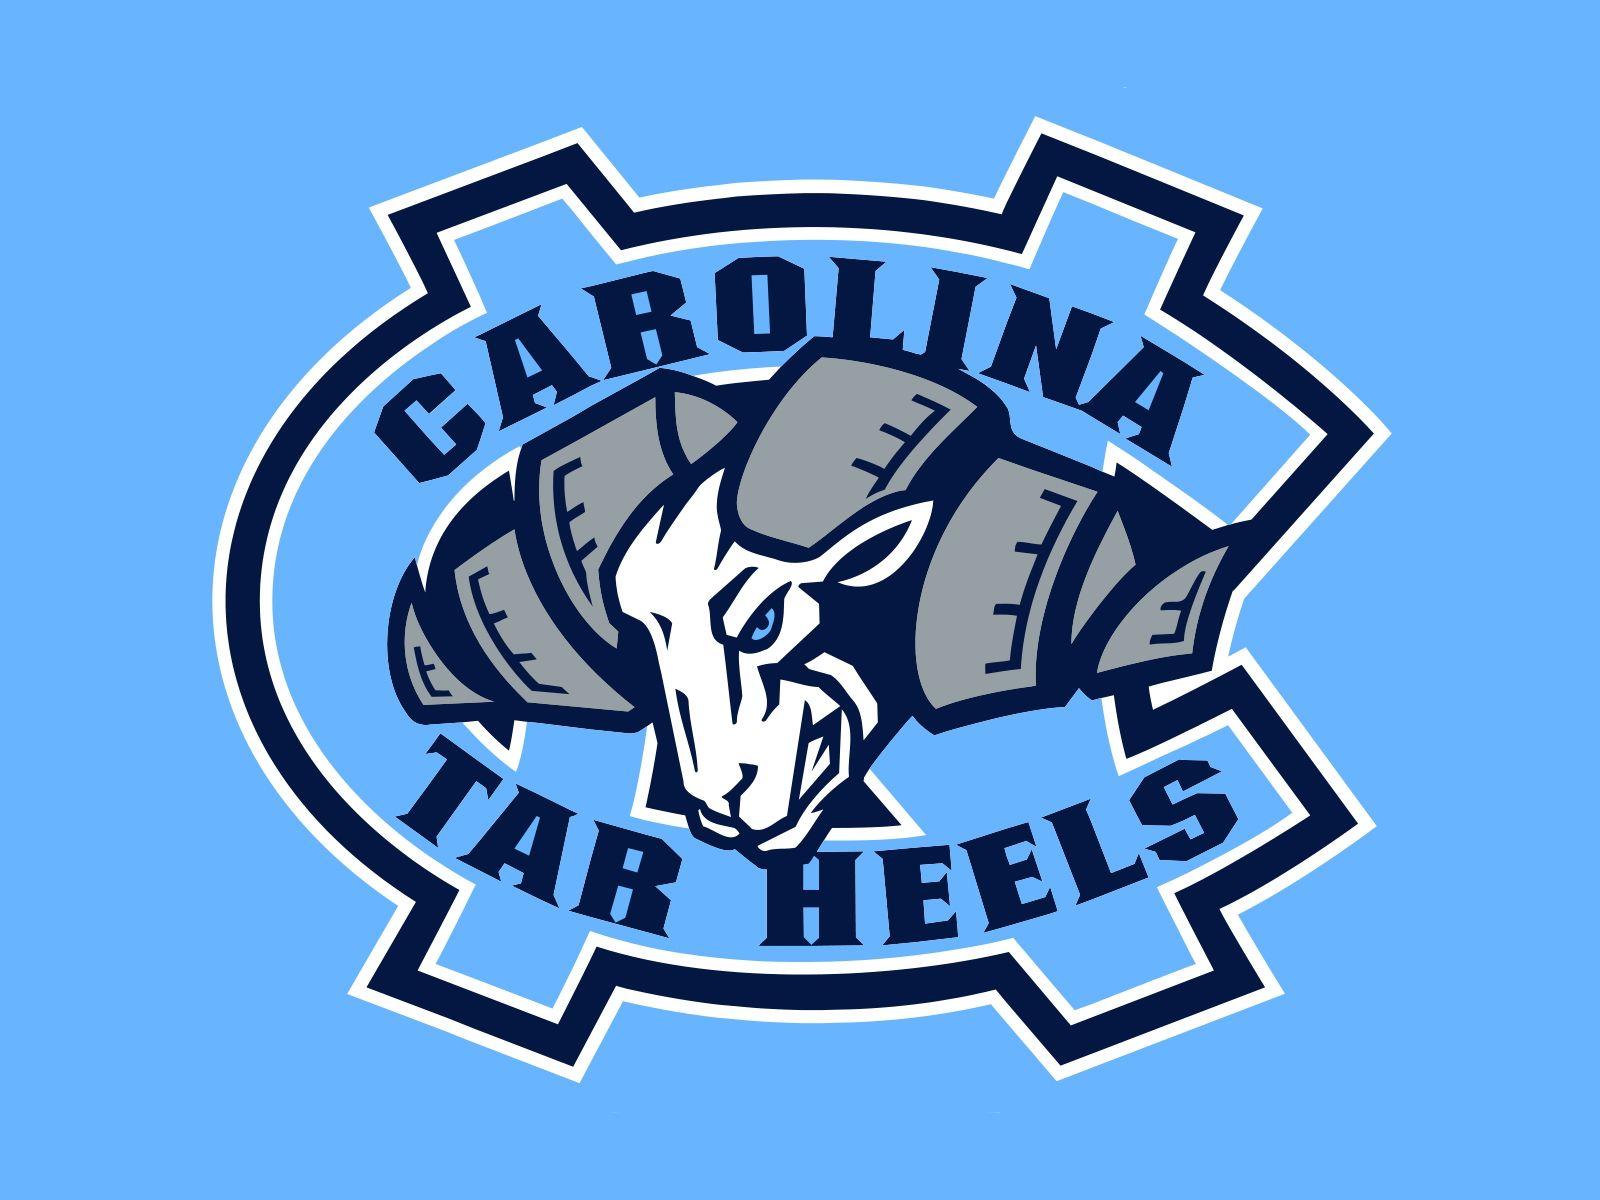 Carolina Logo - North Carolina Logo, North Carolina Symbol, Meaning, History and ...